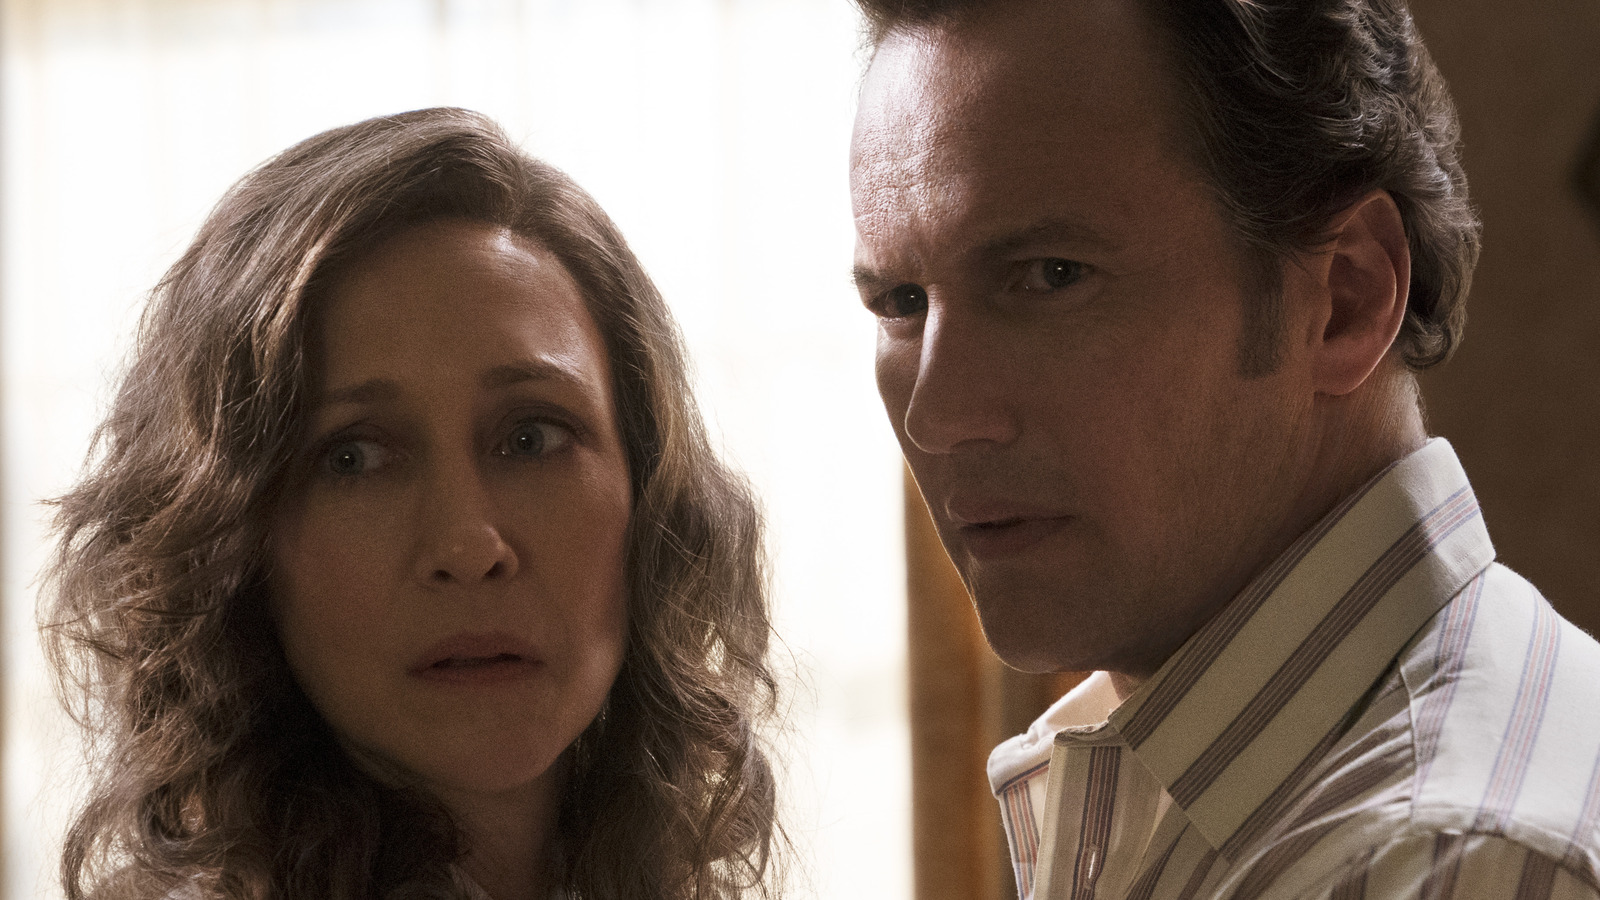 The Conjuring: The Devil Made Me Do It Ending Explained